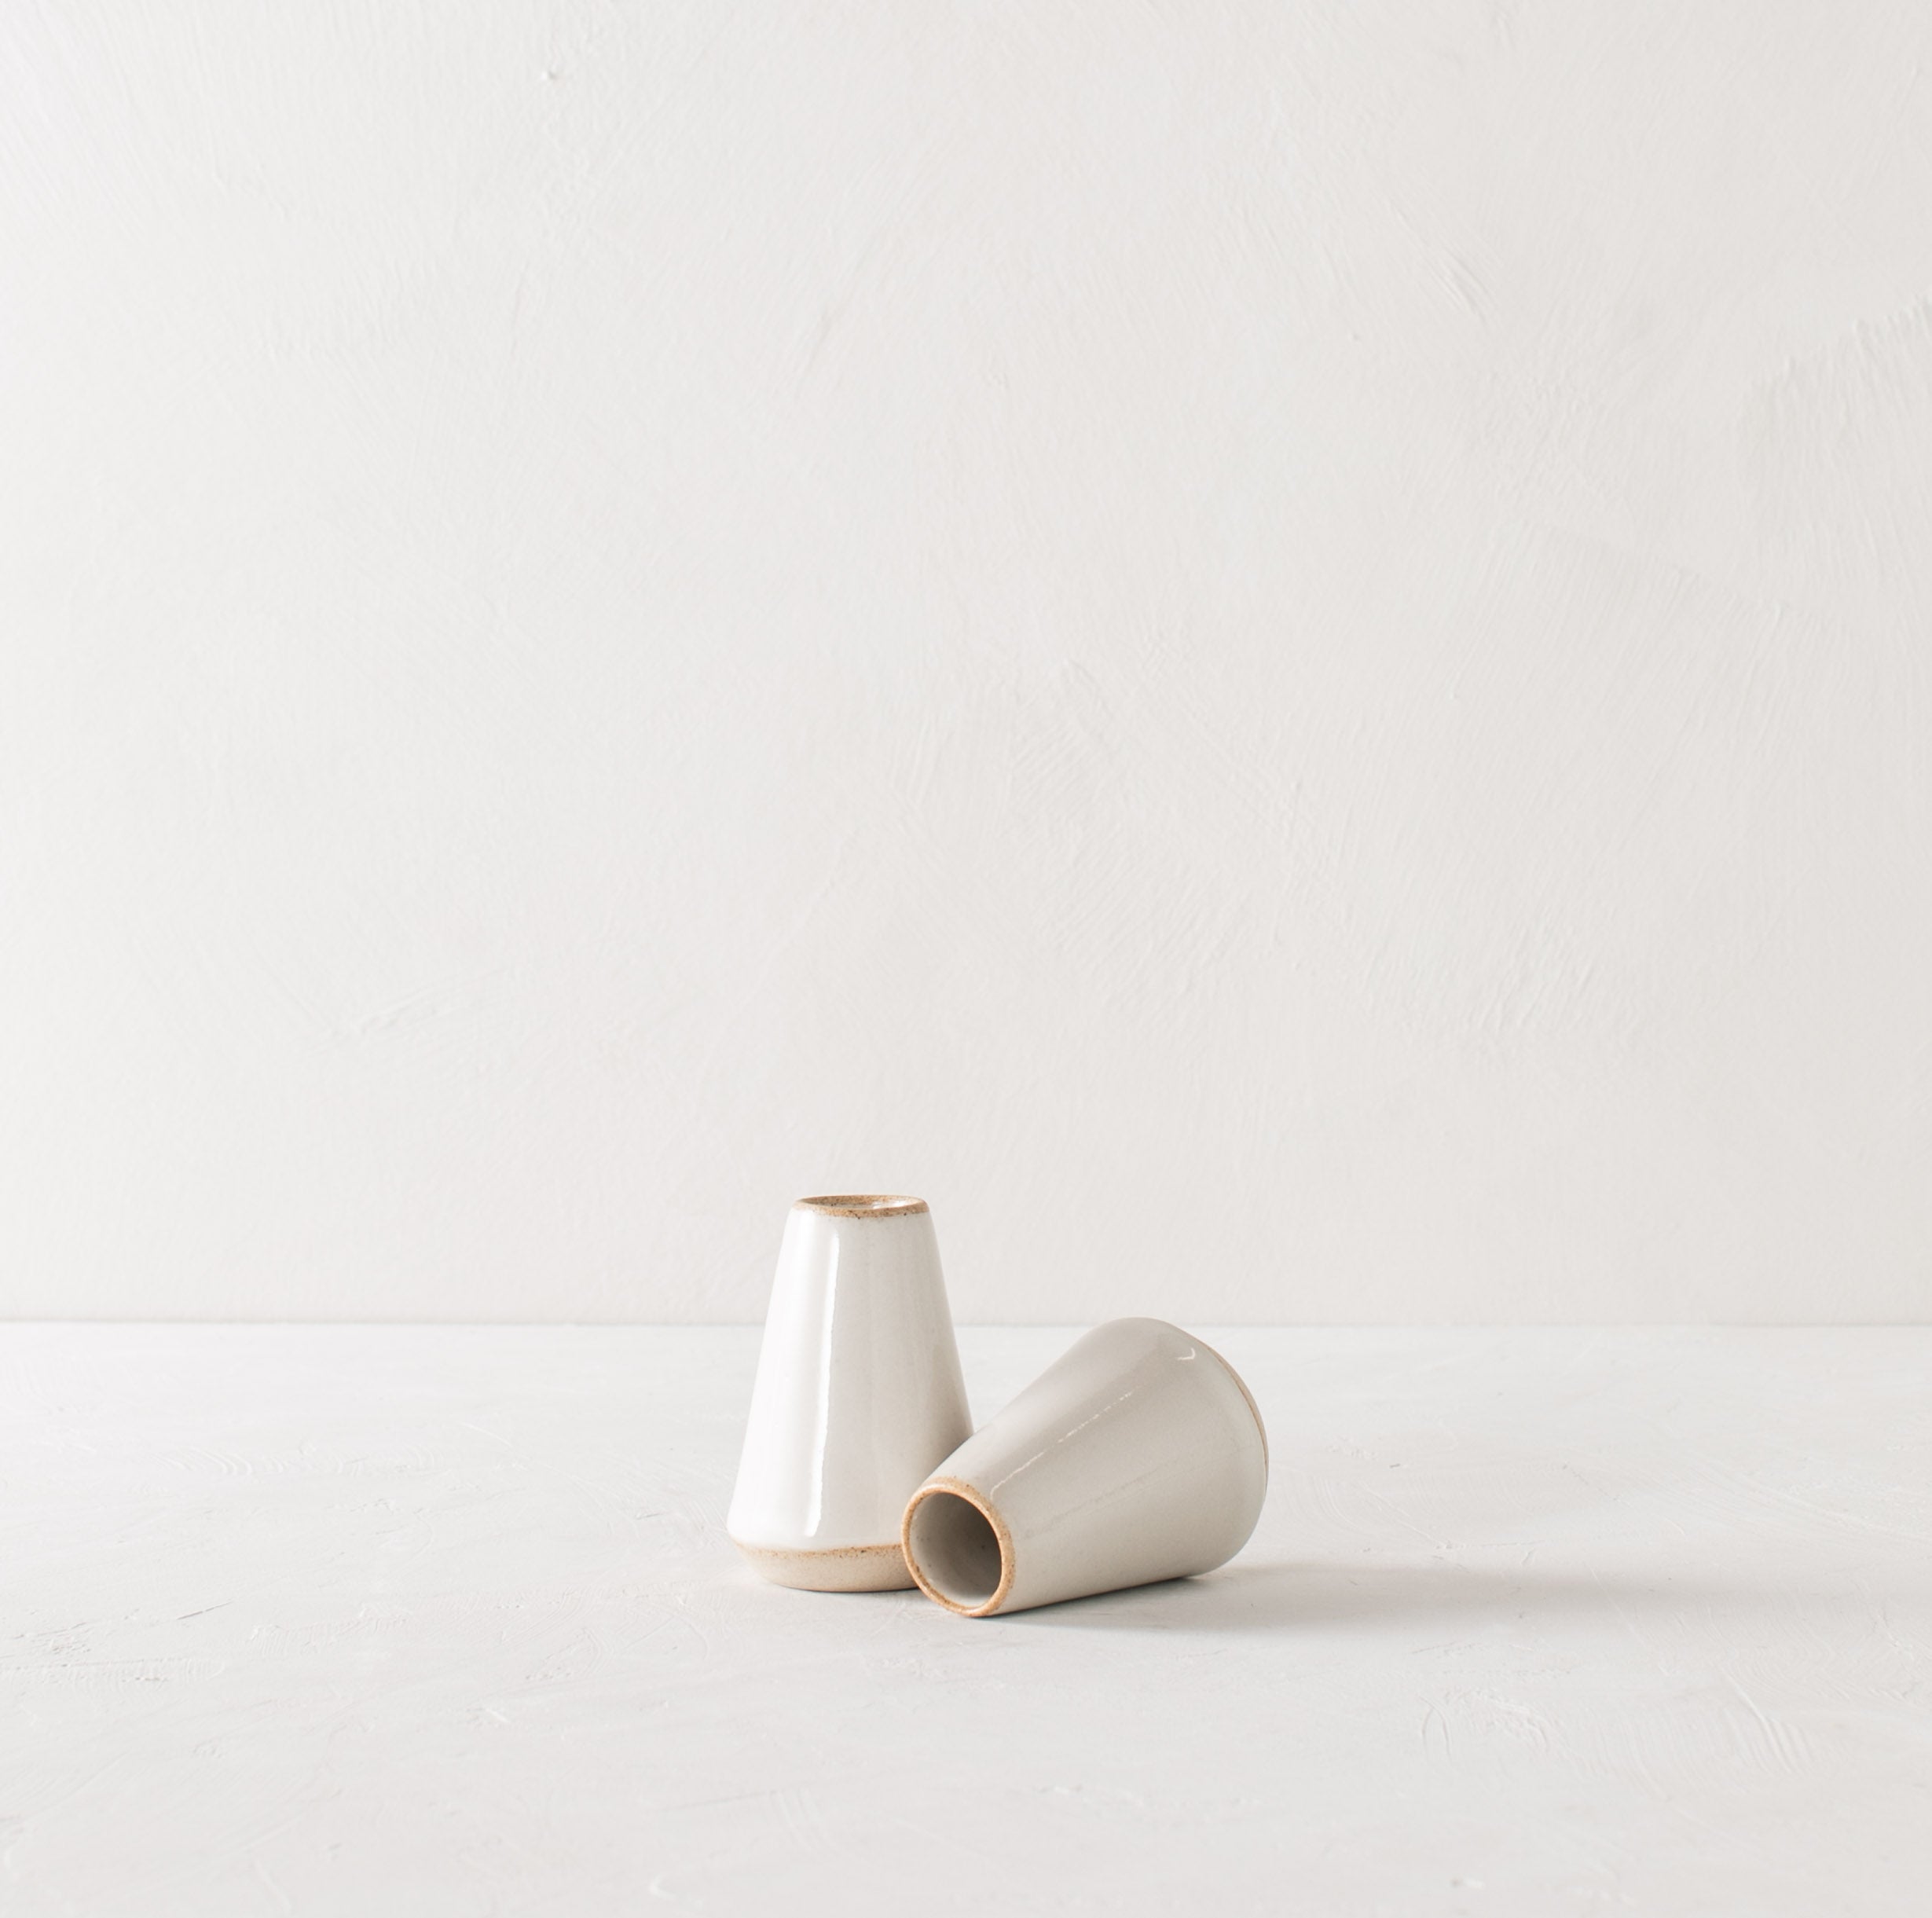 Two minimal white 4 inch tapered bud vase. White glazed with an exposes stoneware rim and base. One upright while the other lays on its side. Handmade ceramic bud vase designed and sold by Convivial Production, Kansas City Ceramics.